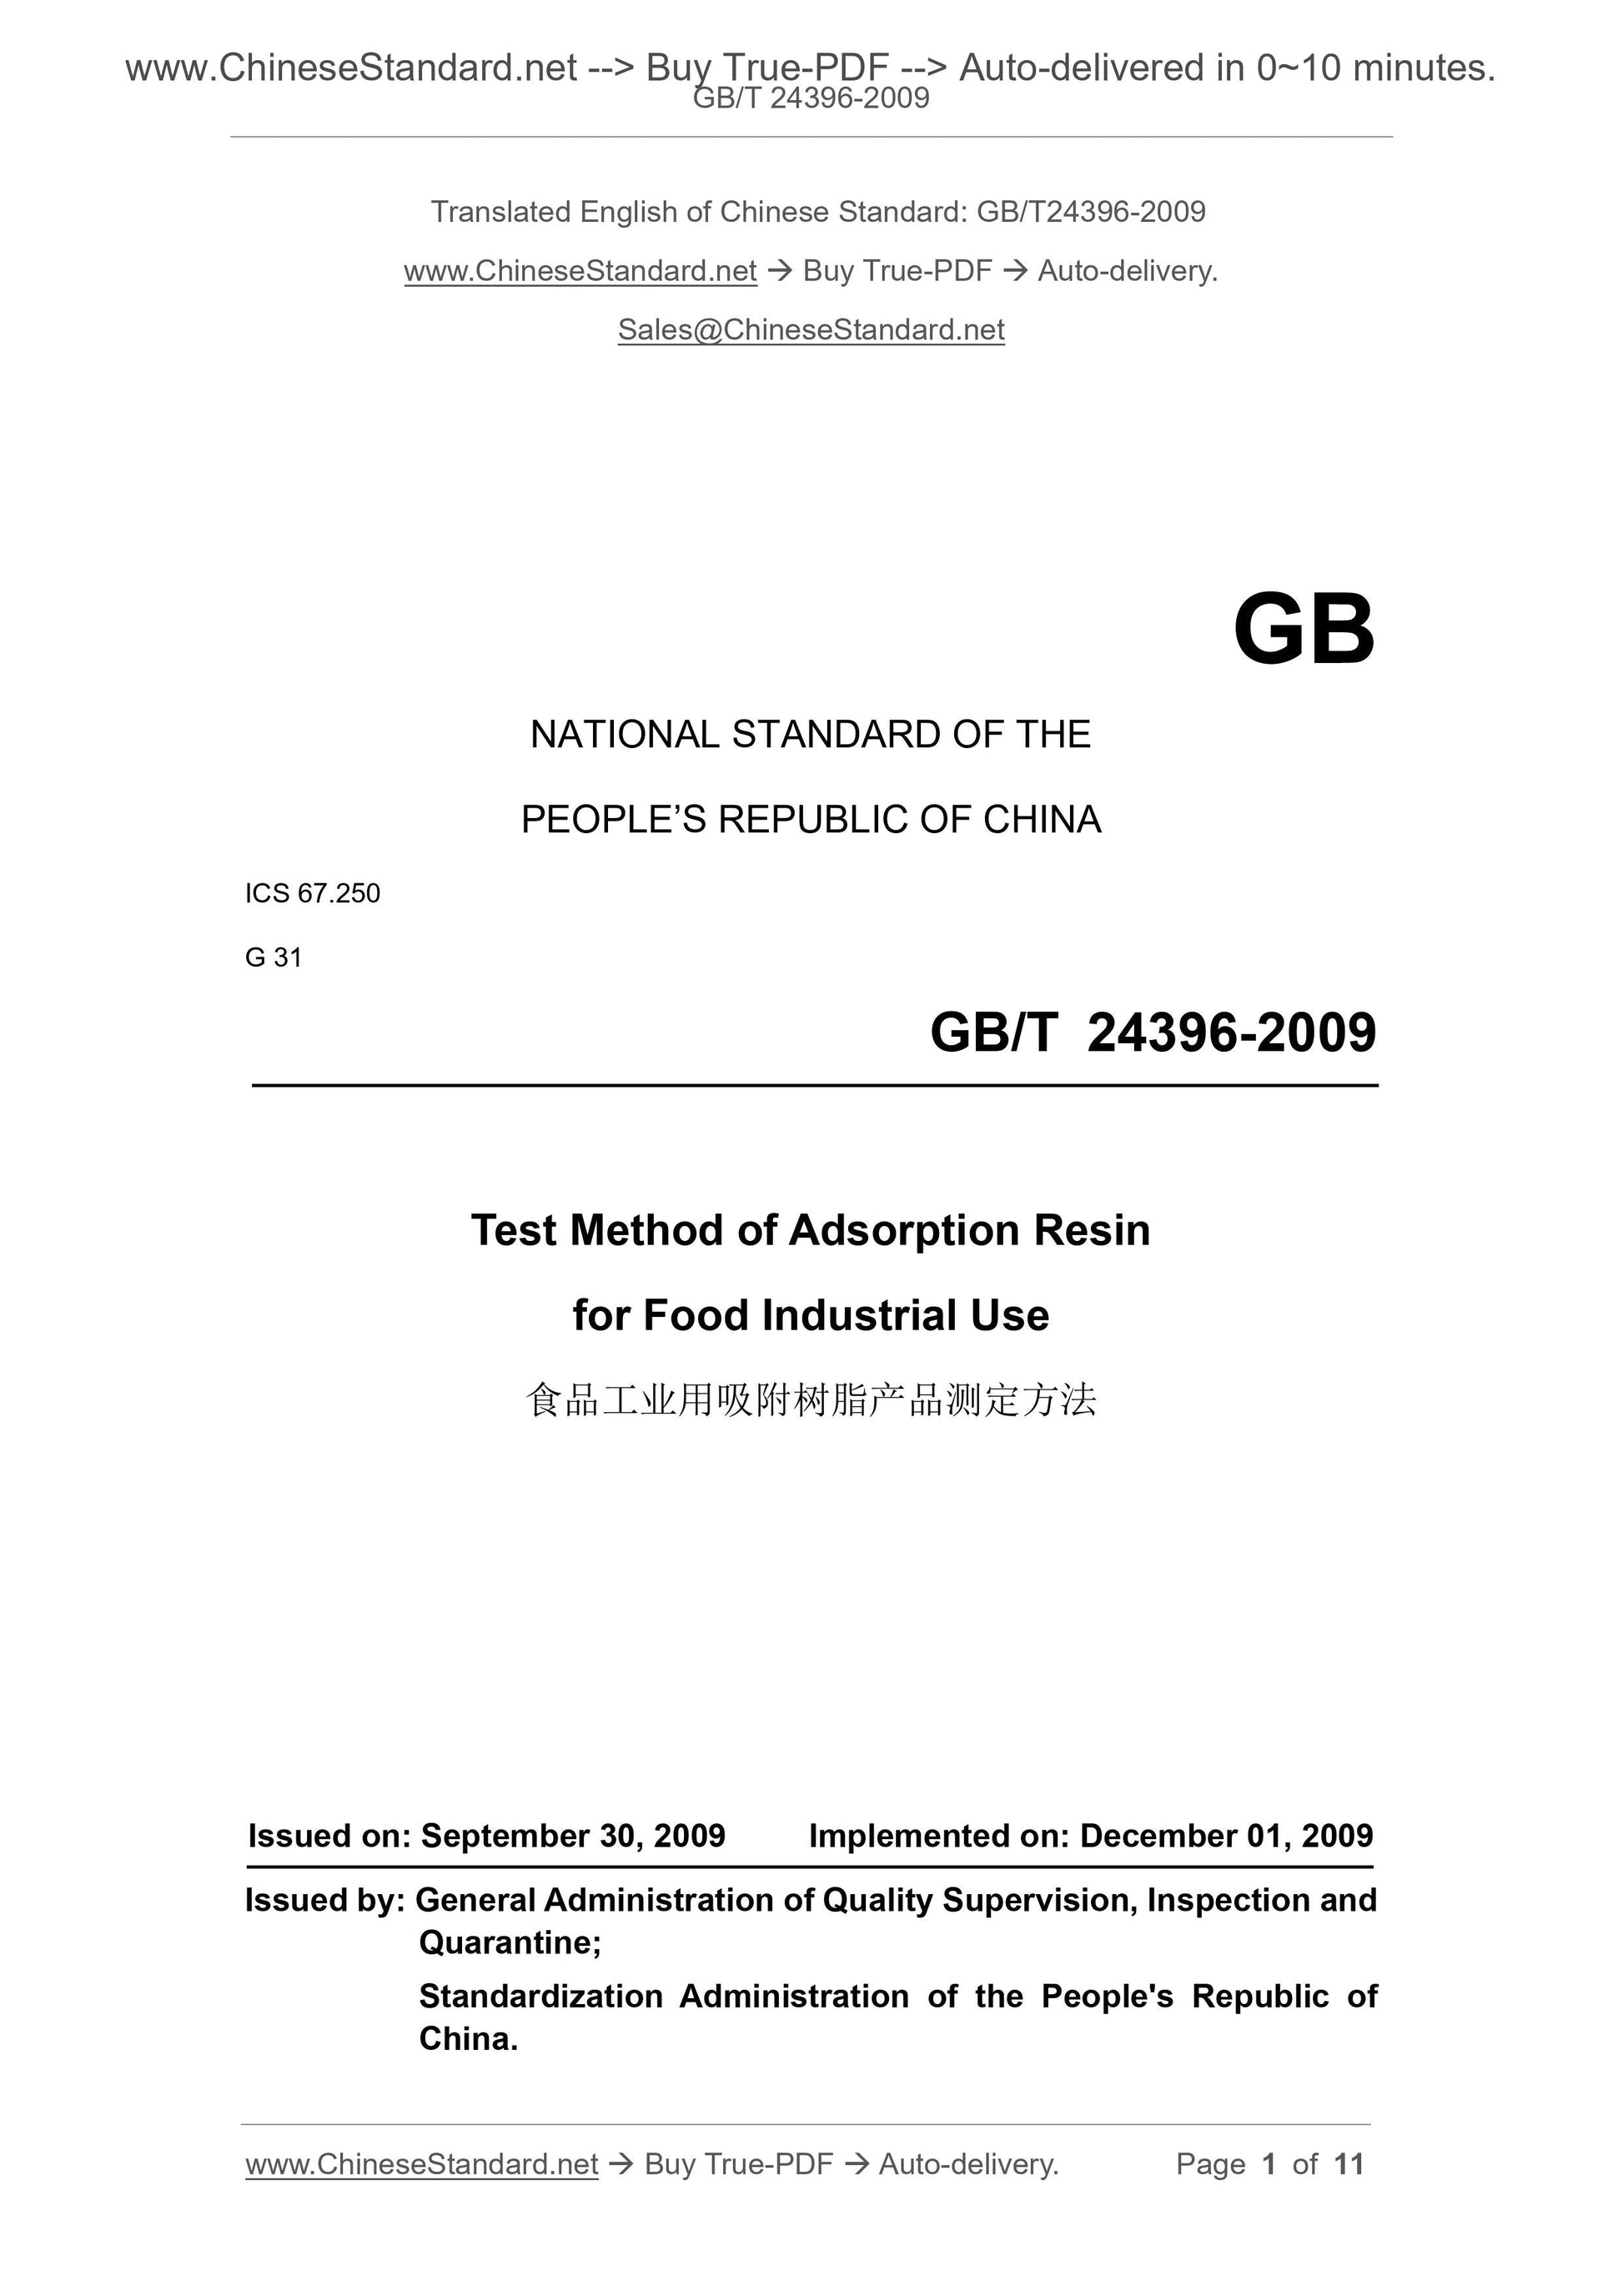 GB/T 24396-2009 Page 1